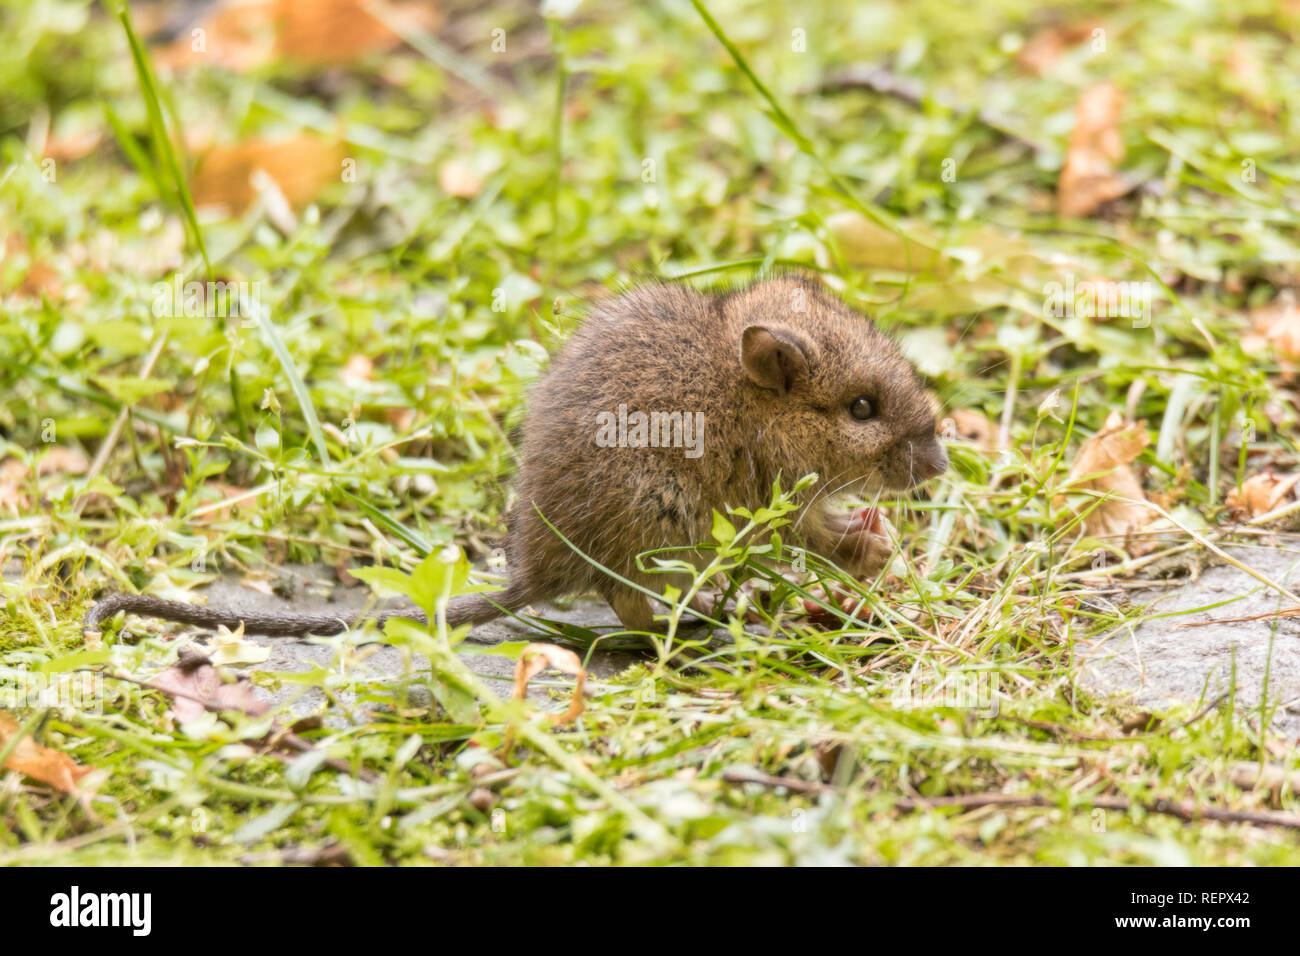 wild baby rat or mouse on garden lawn Stock Photo